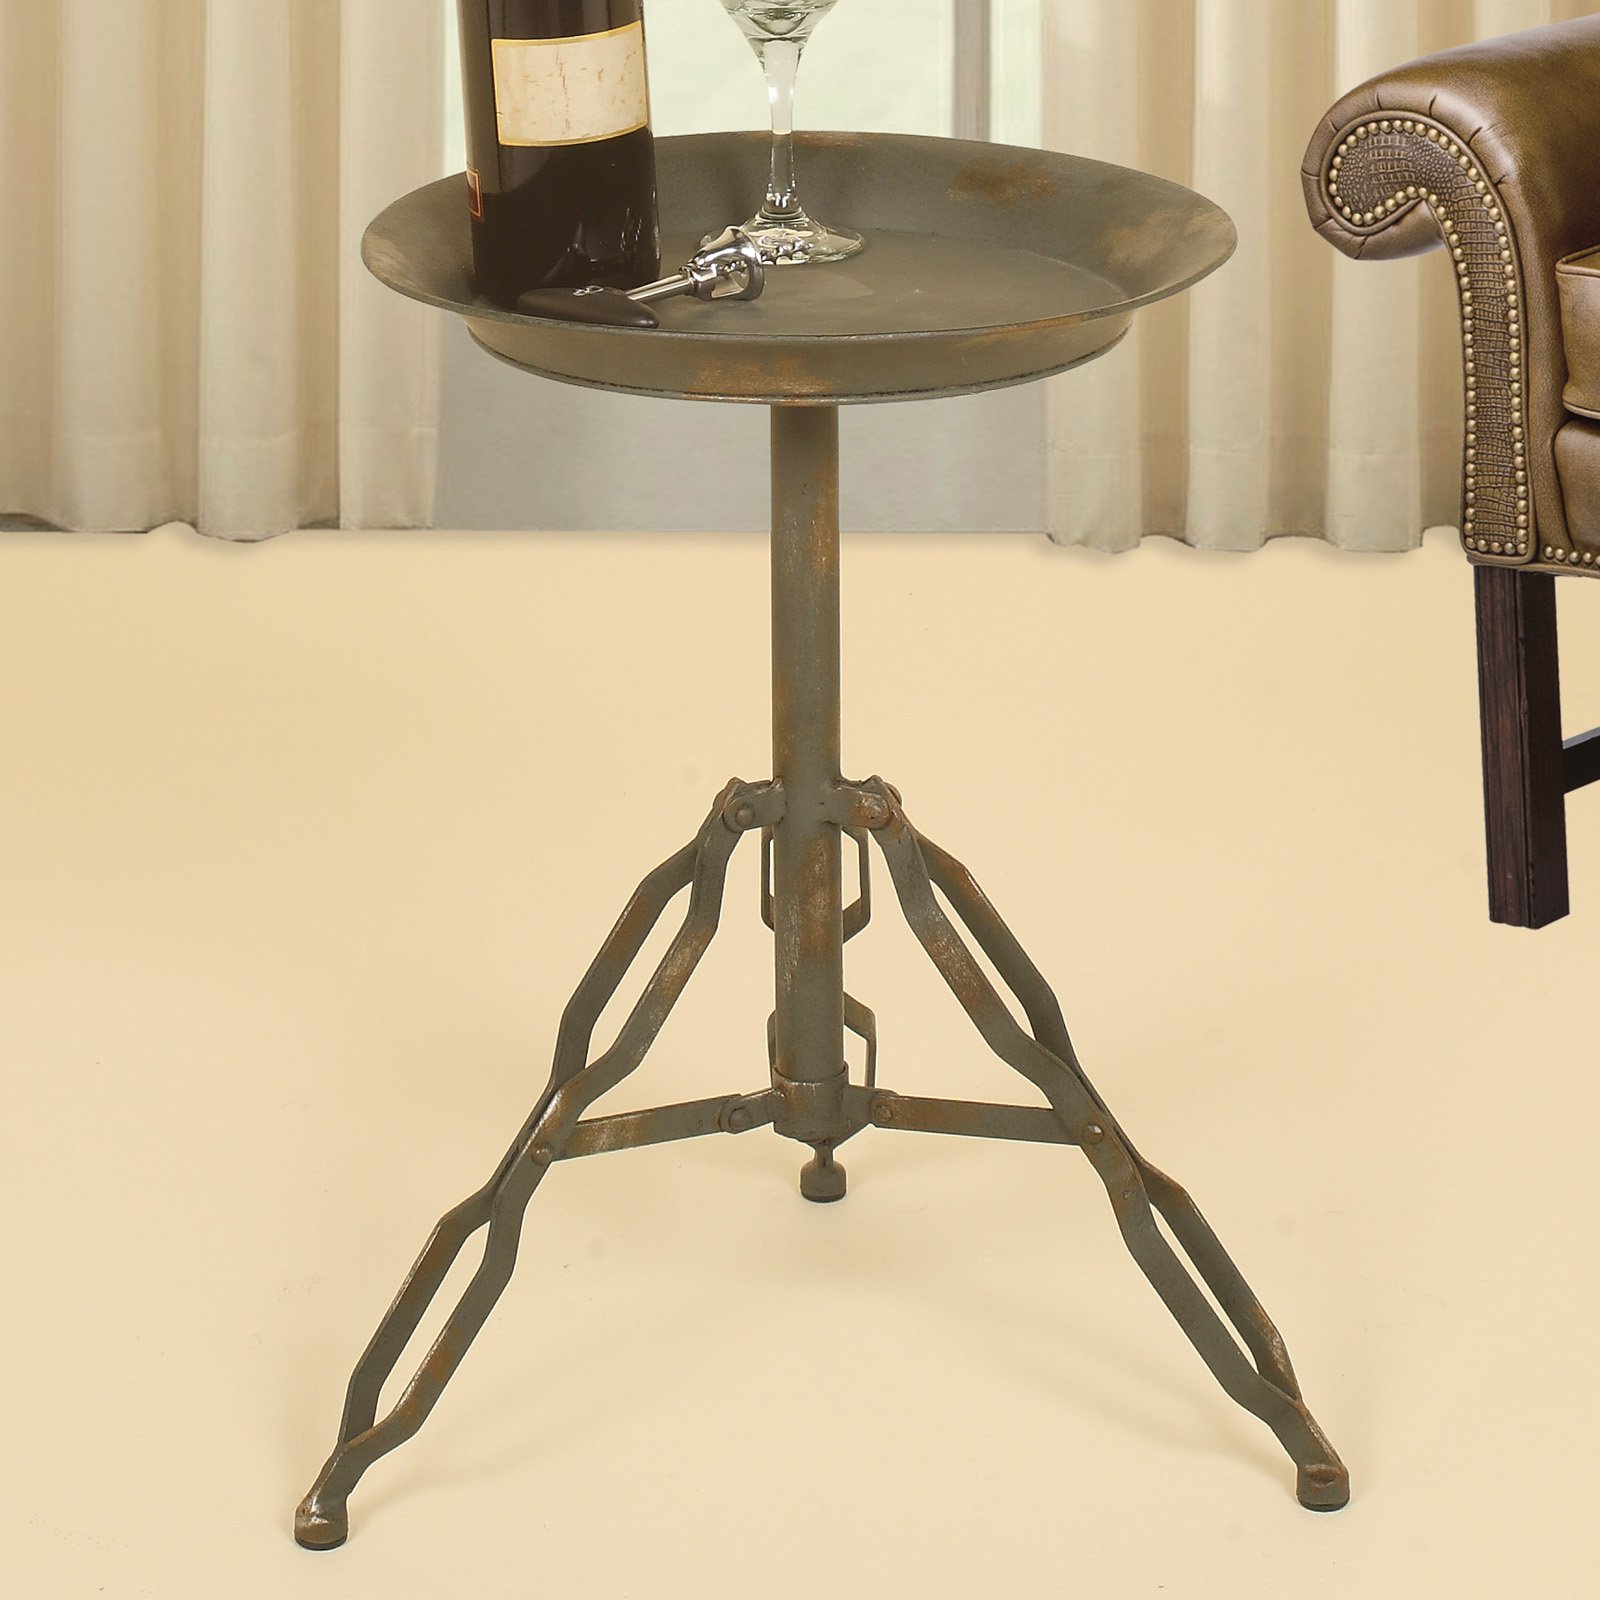 style industrial accent table vintage luxury life farm tures metal polished concrete top coffee with small nesting tables living room armchair spring haven patio furniture